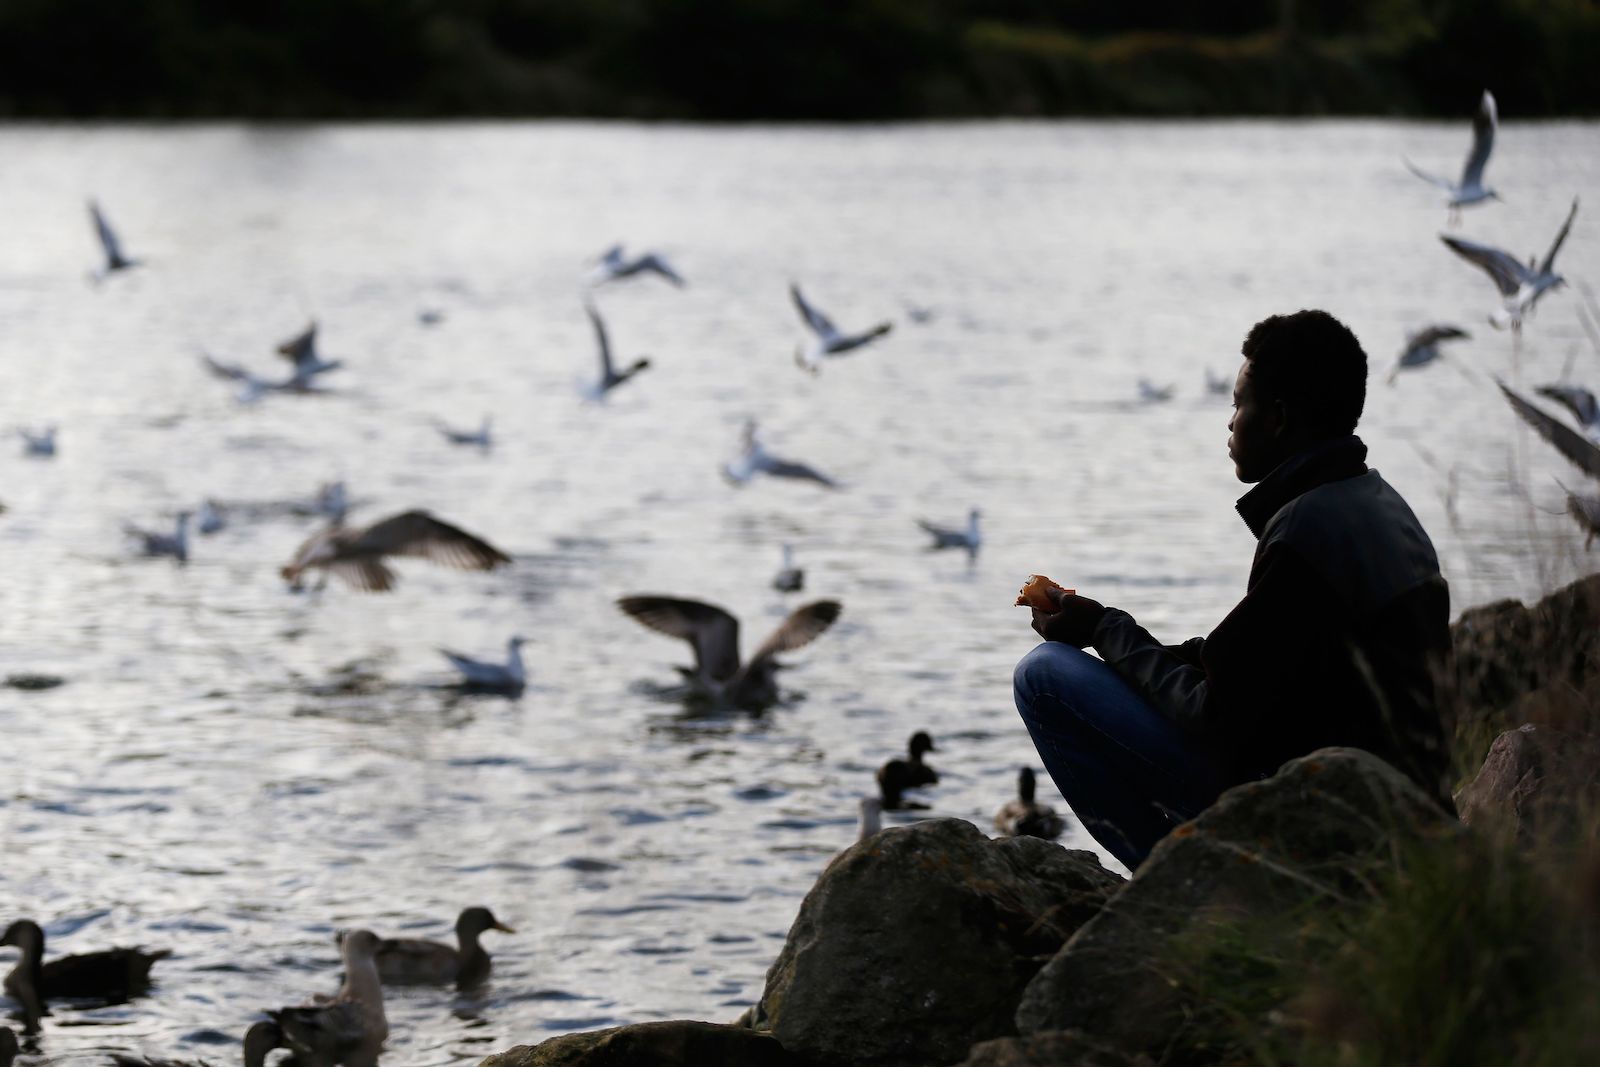 A young African man silhouetted against water amid a flock of sea fowl